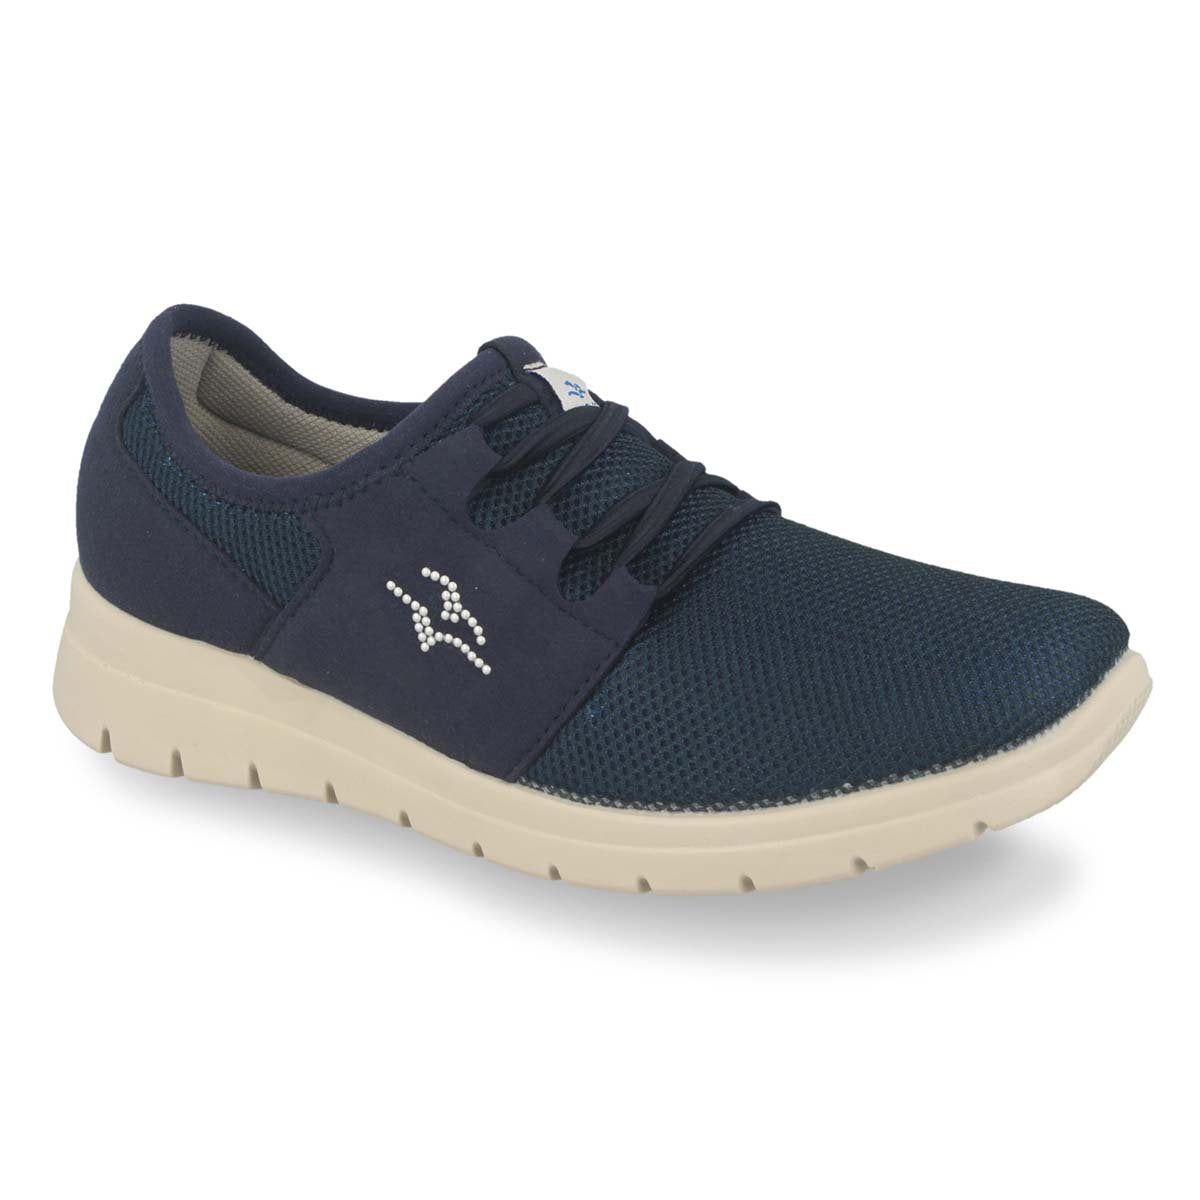 See the Soft Microfiber Sneaker Women Shoes in the colour ANTHRACITE, available in various sizes